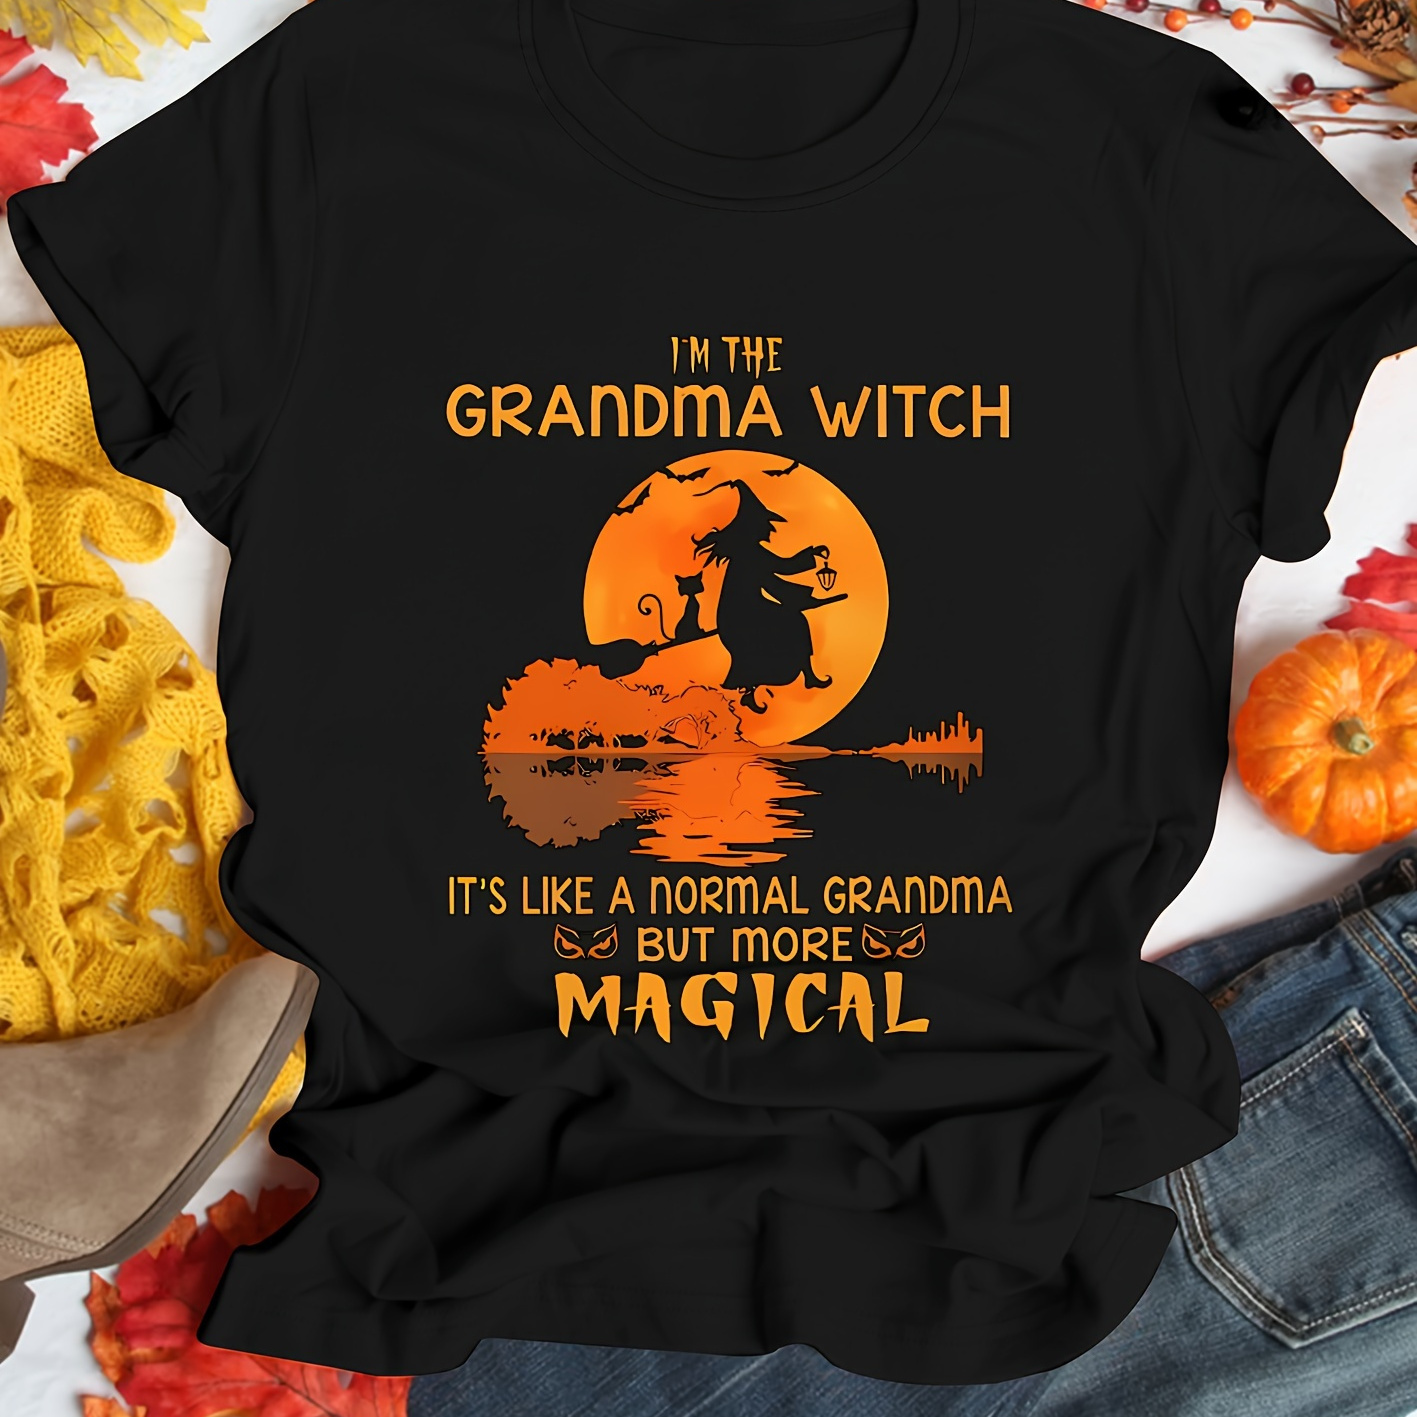 

Women's Halloween Graphic T-shirt, "i'm The Grandma Witch" Print, Short Sleeve, Round Neck, Vintage Style, Casual Summer Top